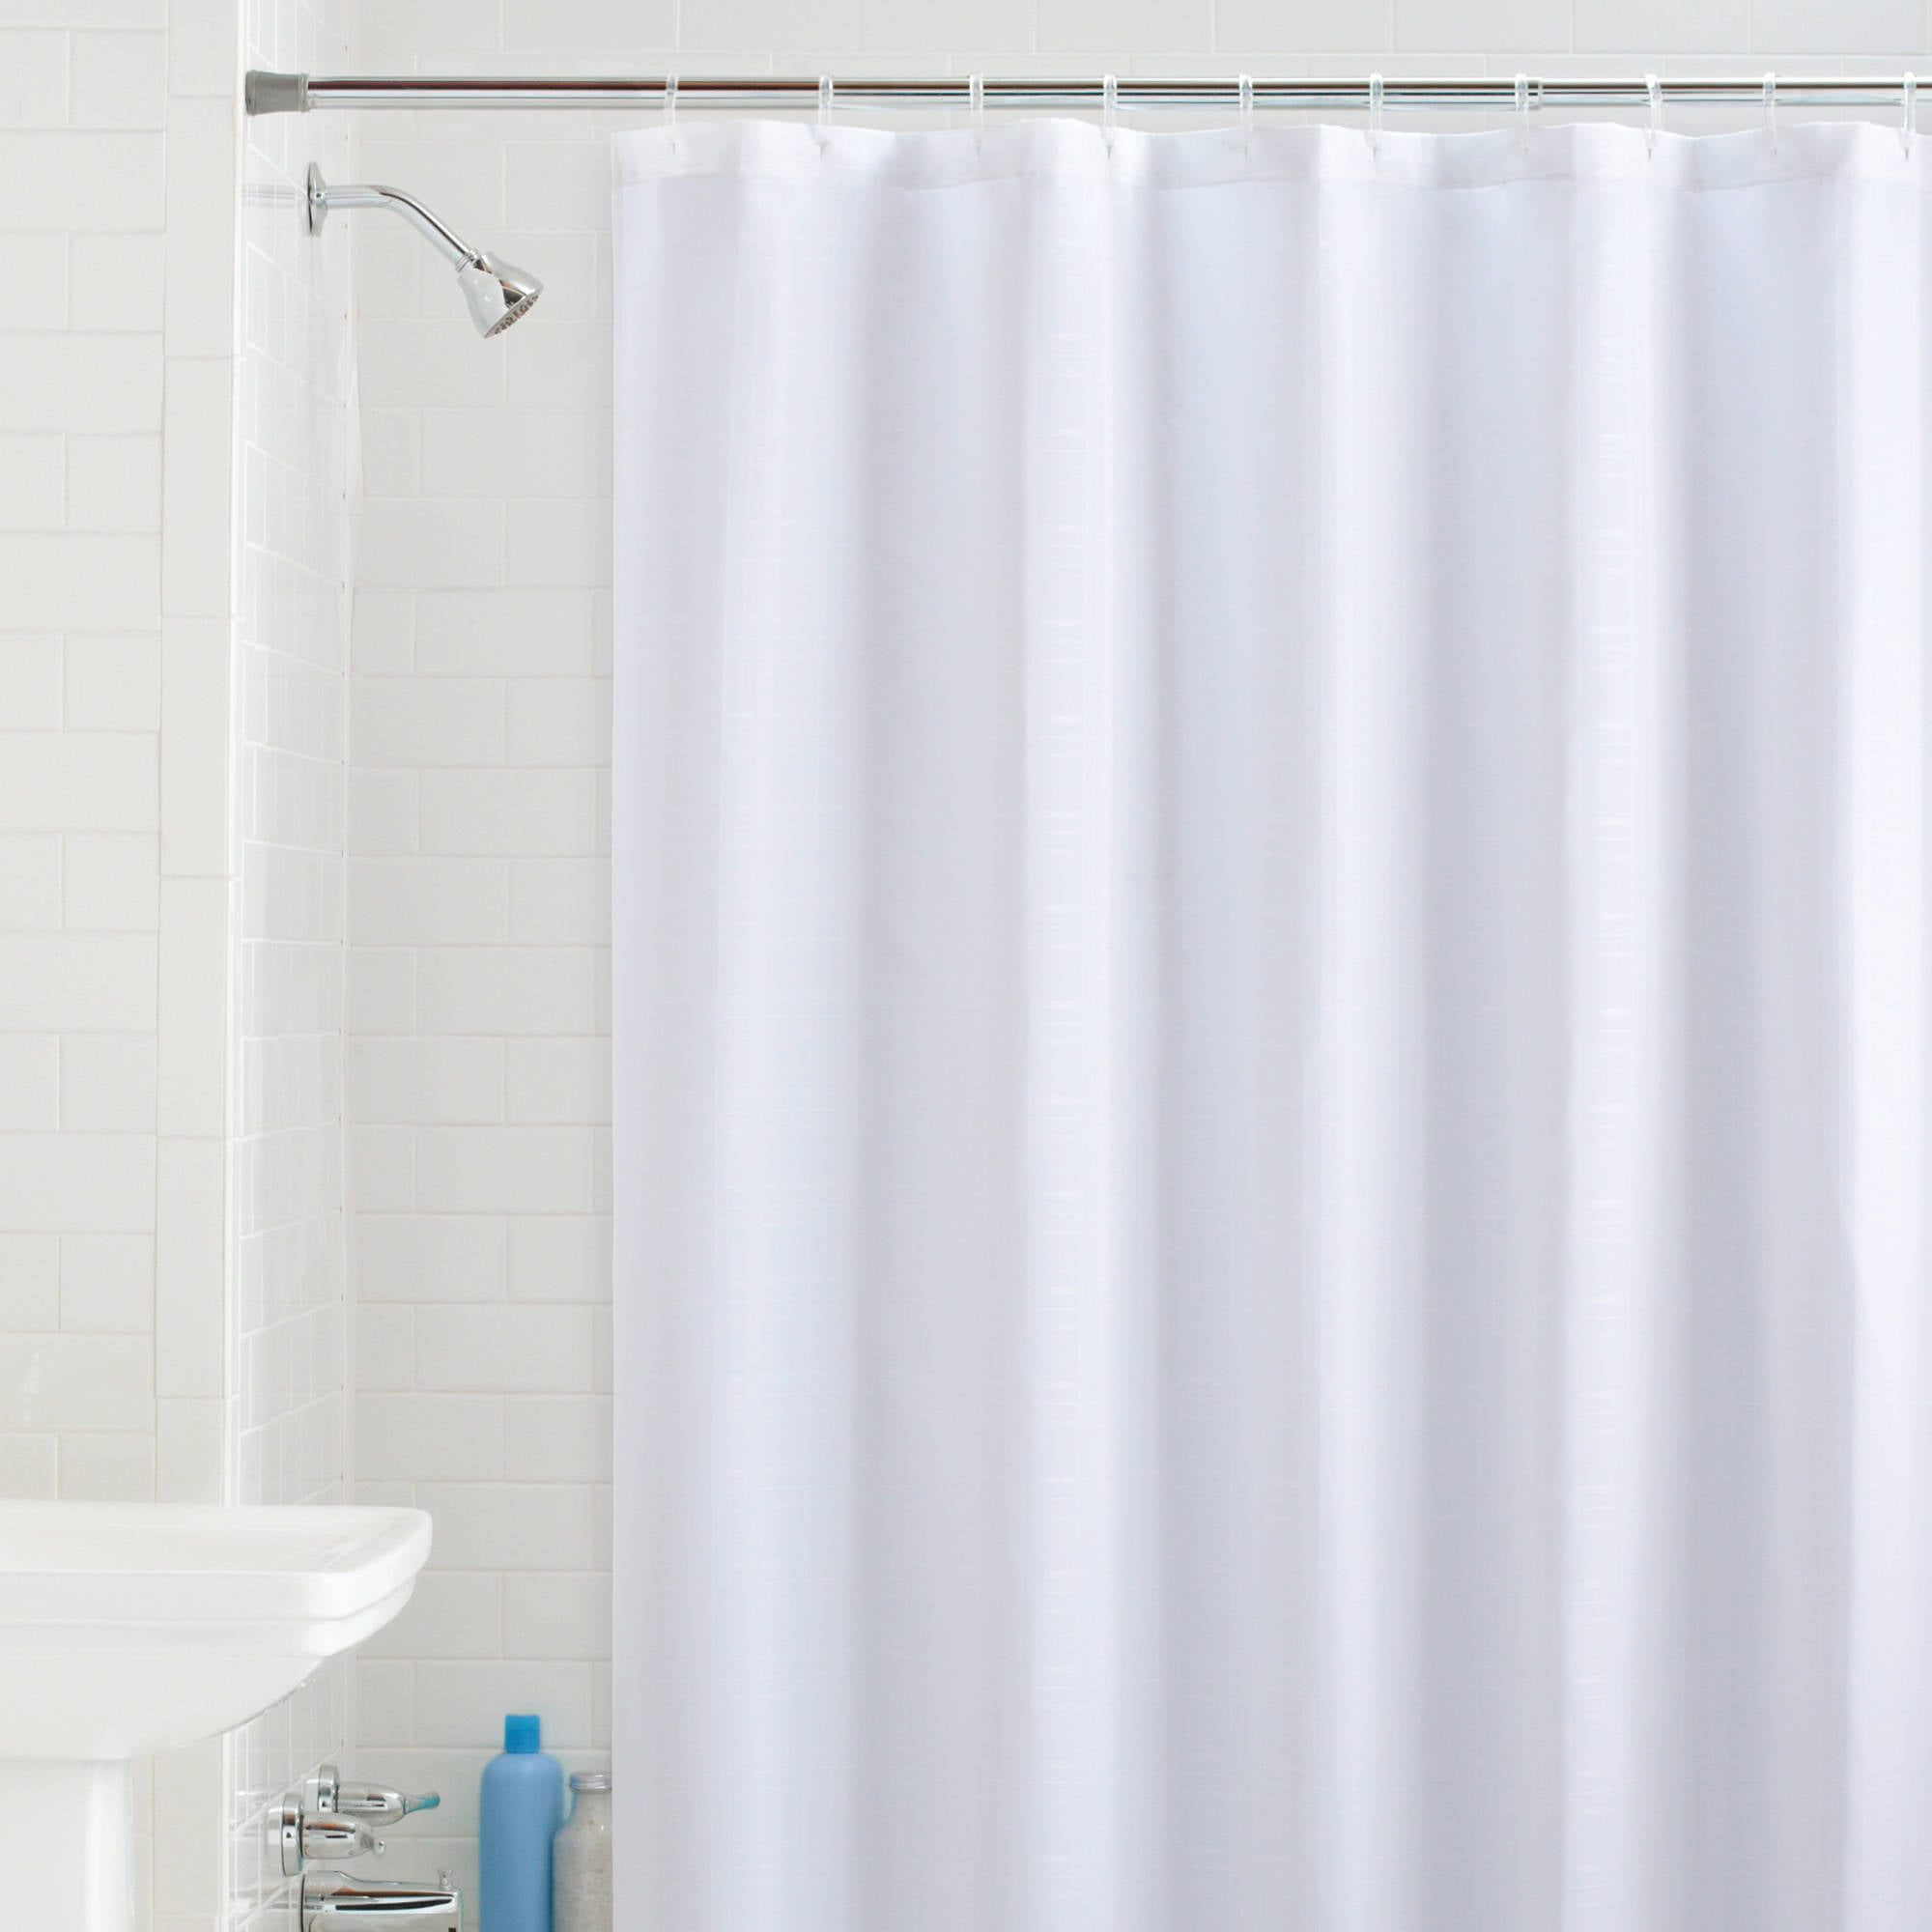 Mildew Resistant Fabric Shower Curtain, How To Clean Mildew Off Fabric Shower Curtain Liner